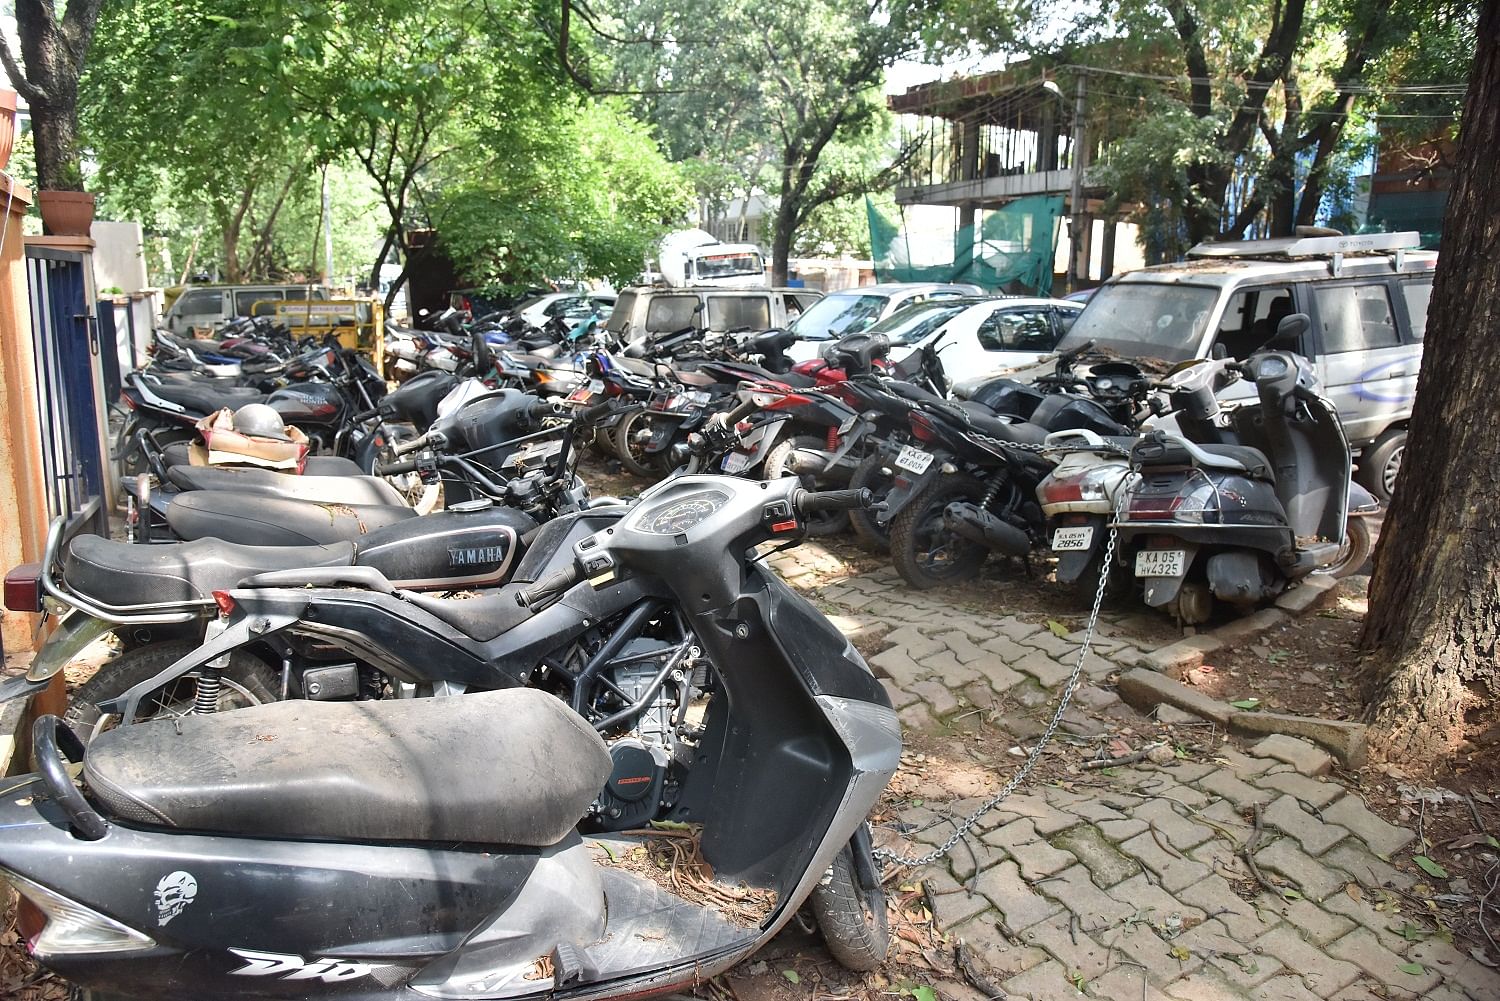 A large number of seized vehicles occupy footpaths near the Jayanagar police station, obstructing pedestrian movement. DH PHOTO BY B K JANARDHAN